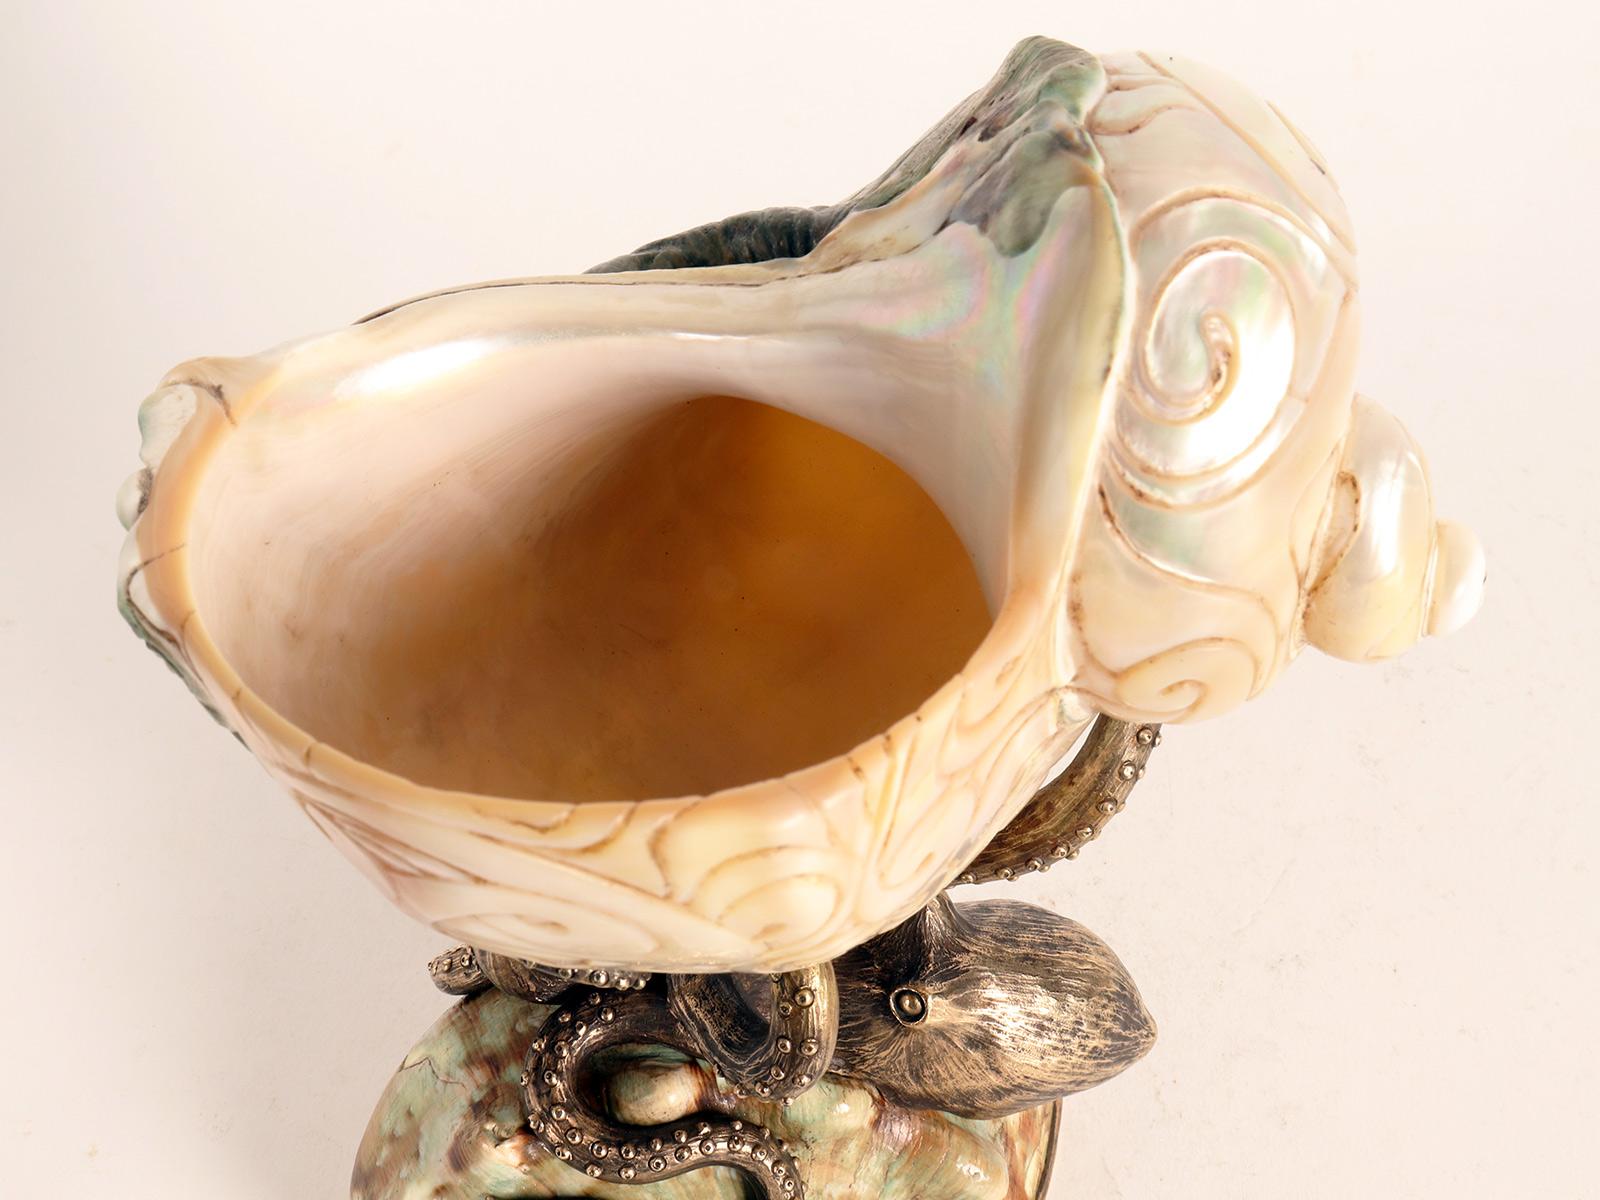 A cup with a shell of Turbo marmoratus, Germany 1870.  10